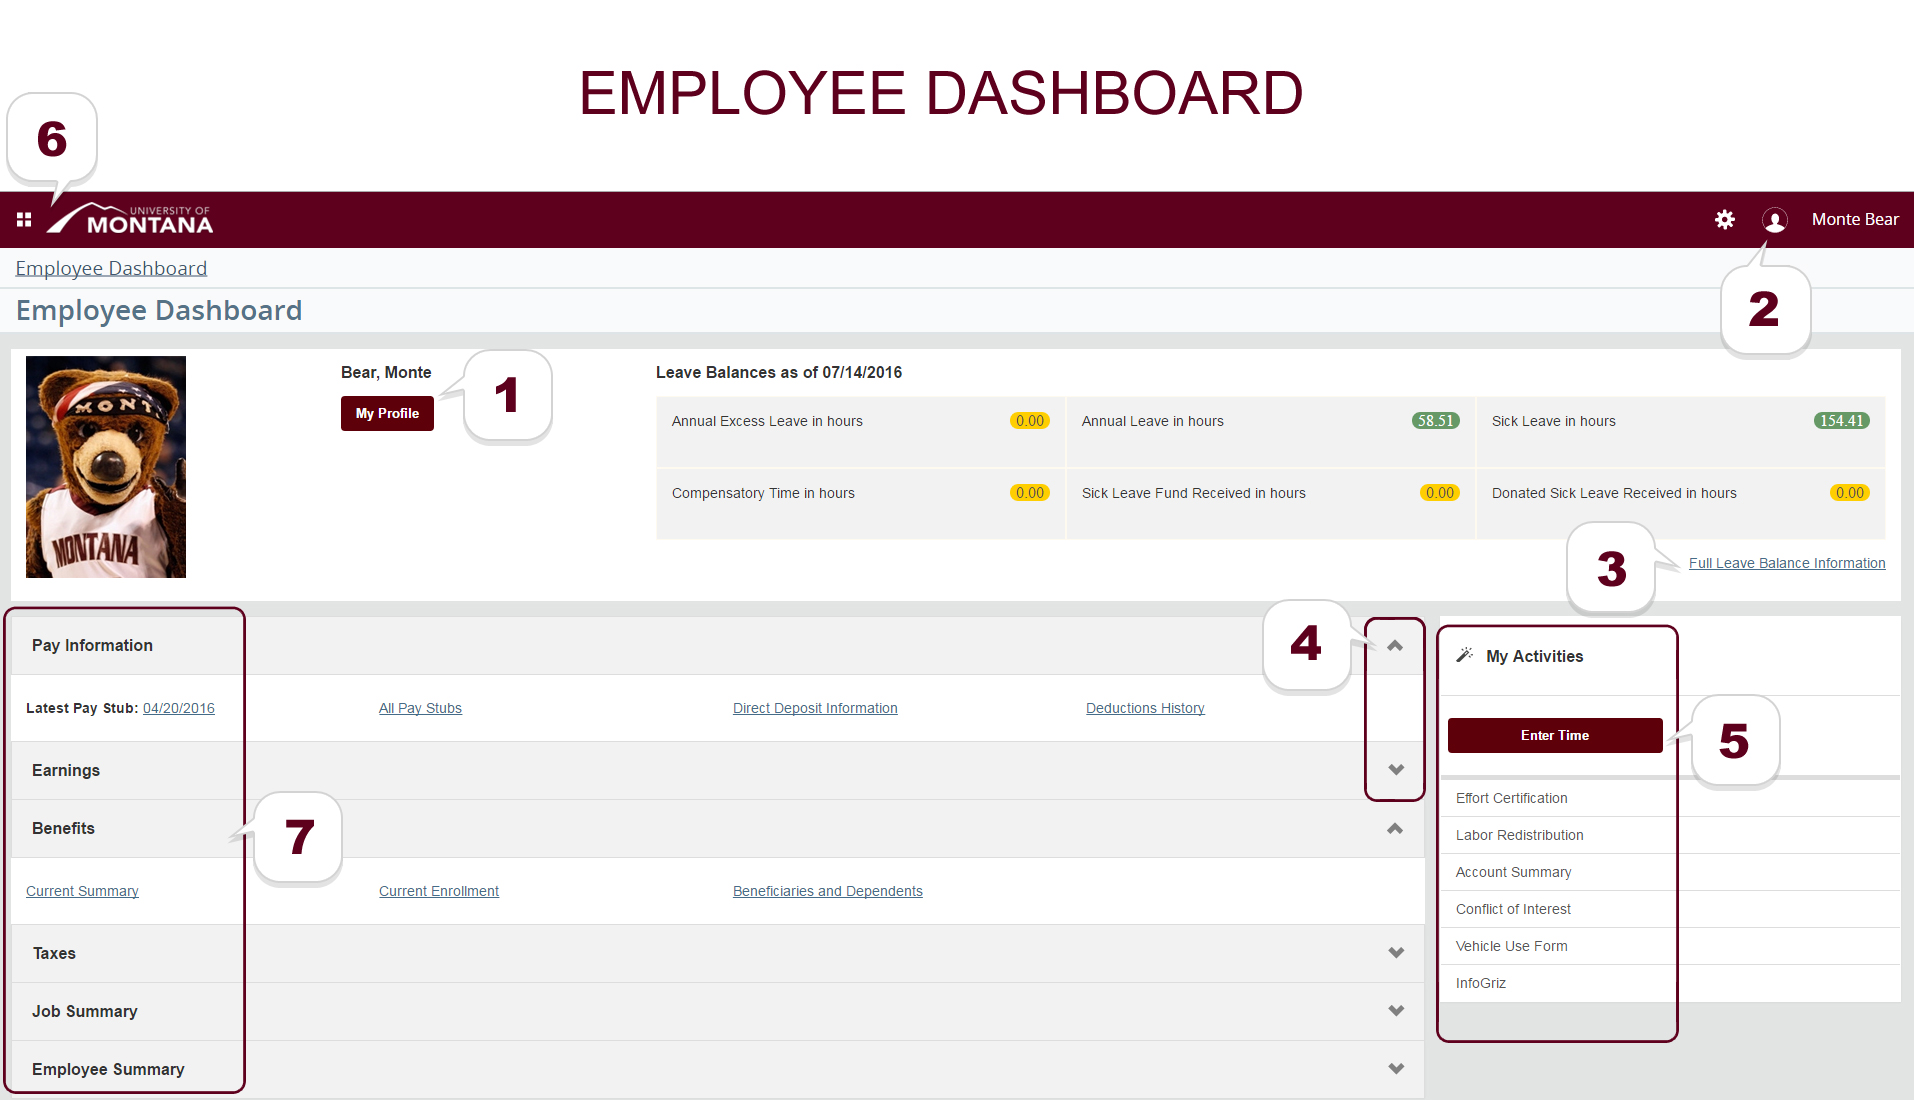 The new Employee Profile Dashboard (Banner XE) will provide employees with a more comprehensive view of frequently sought after information at one location rather than clicking through multiple screens in Cyberbear.